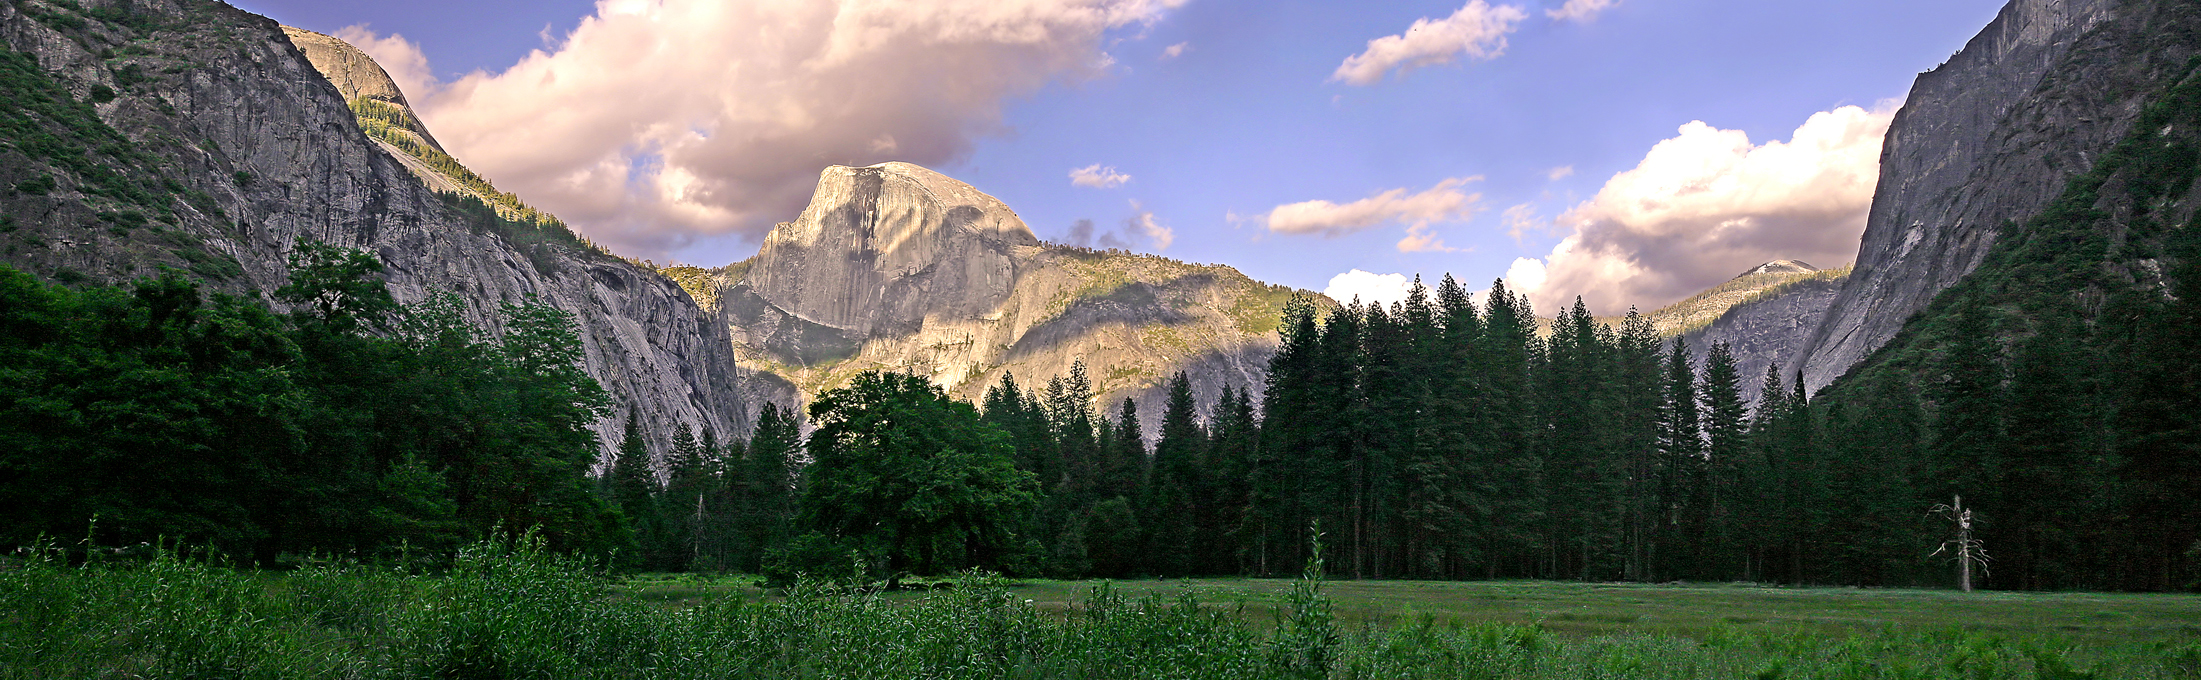 half dome from the field